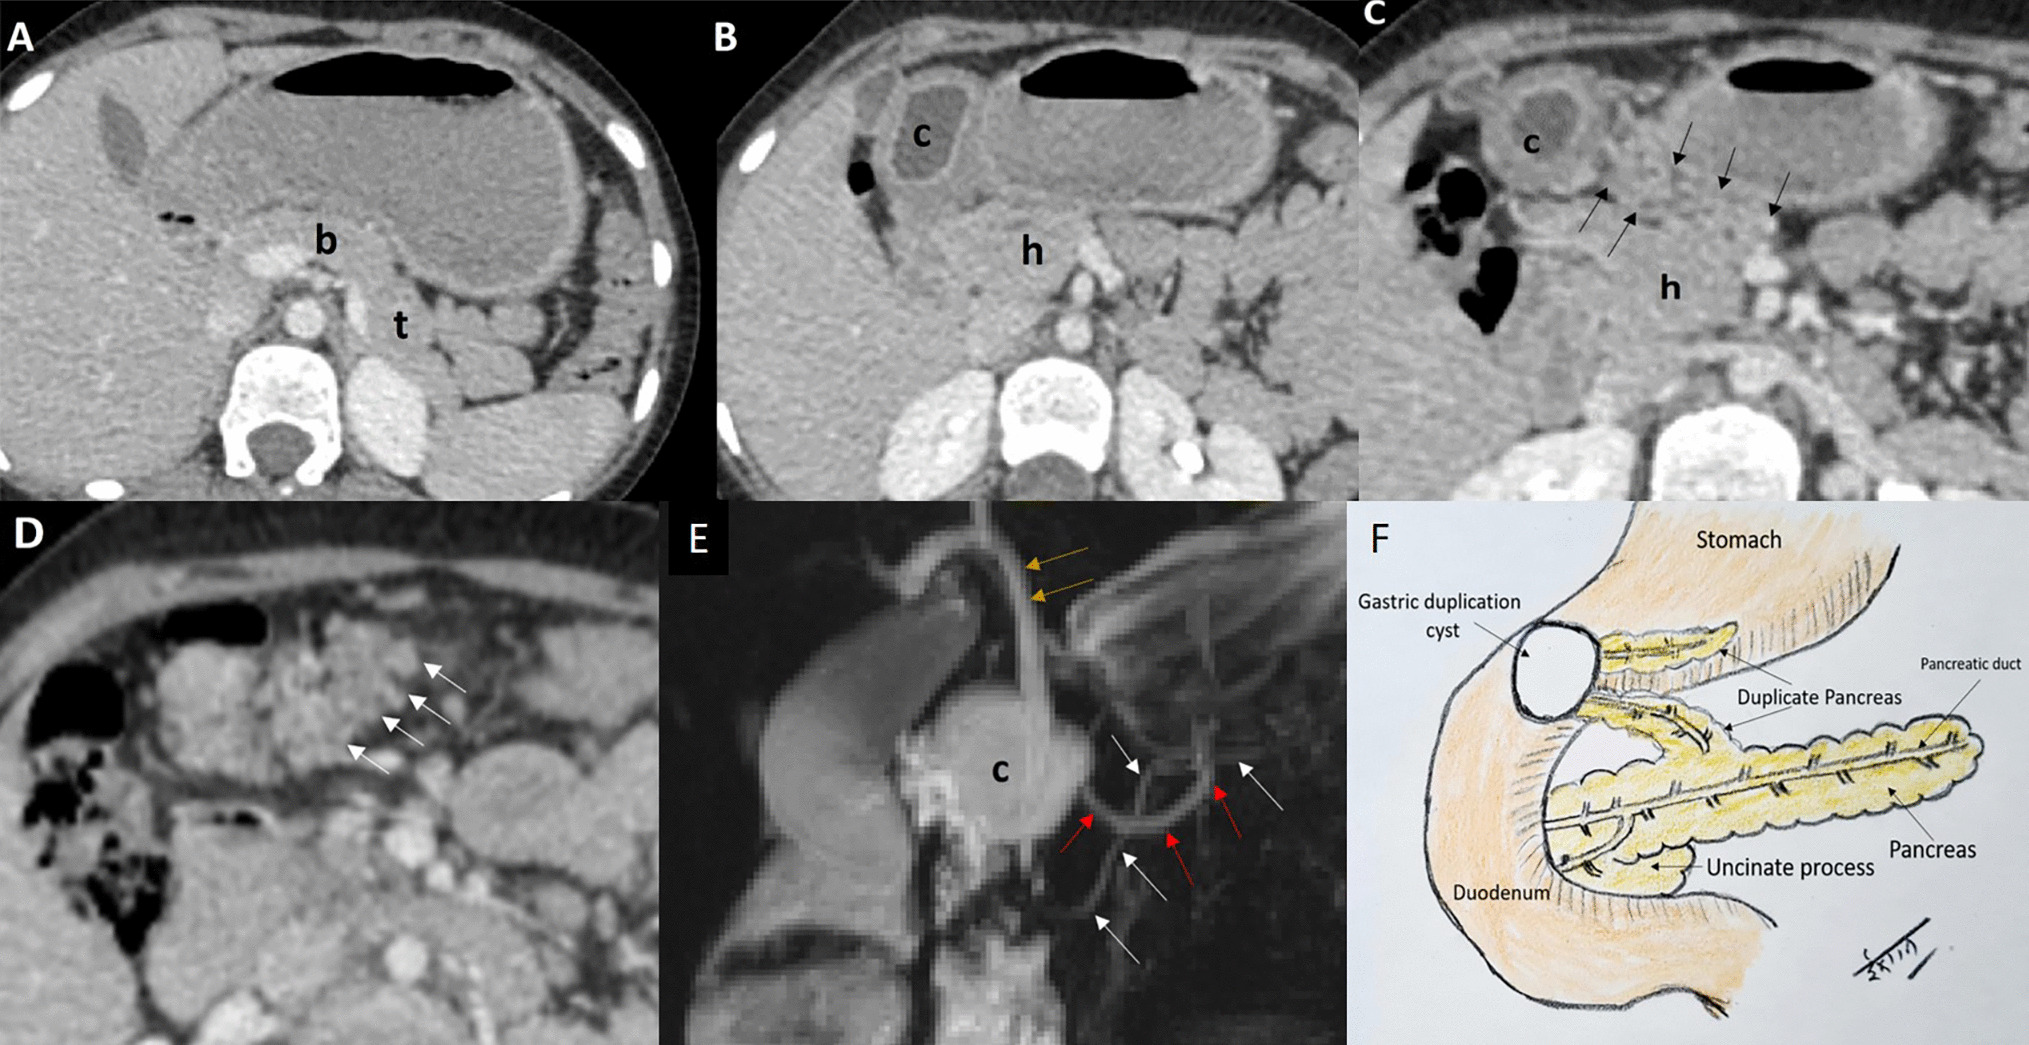 A Rare Cause of Acute Recurrent Pancreatitis in a Child